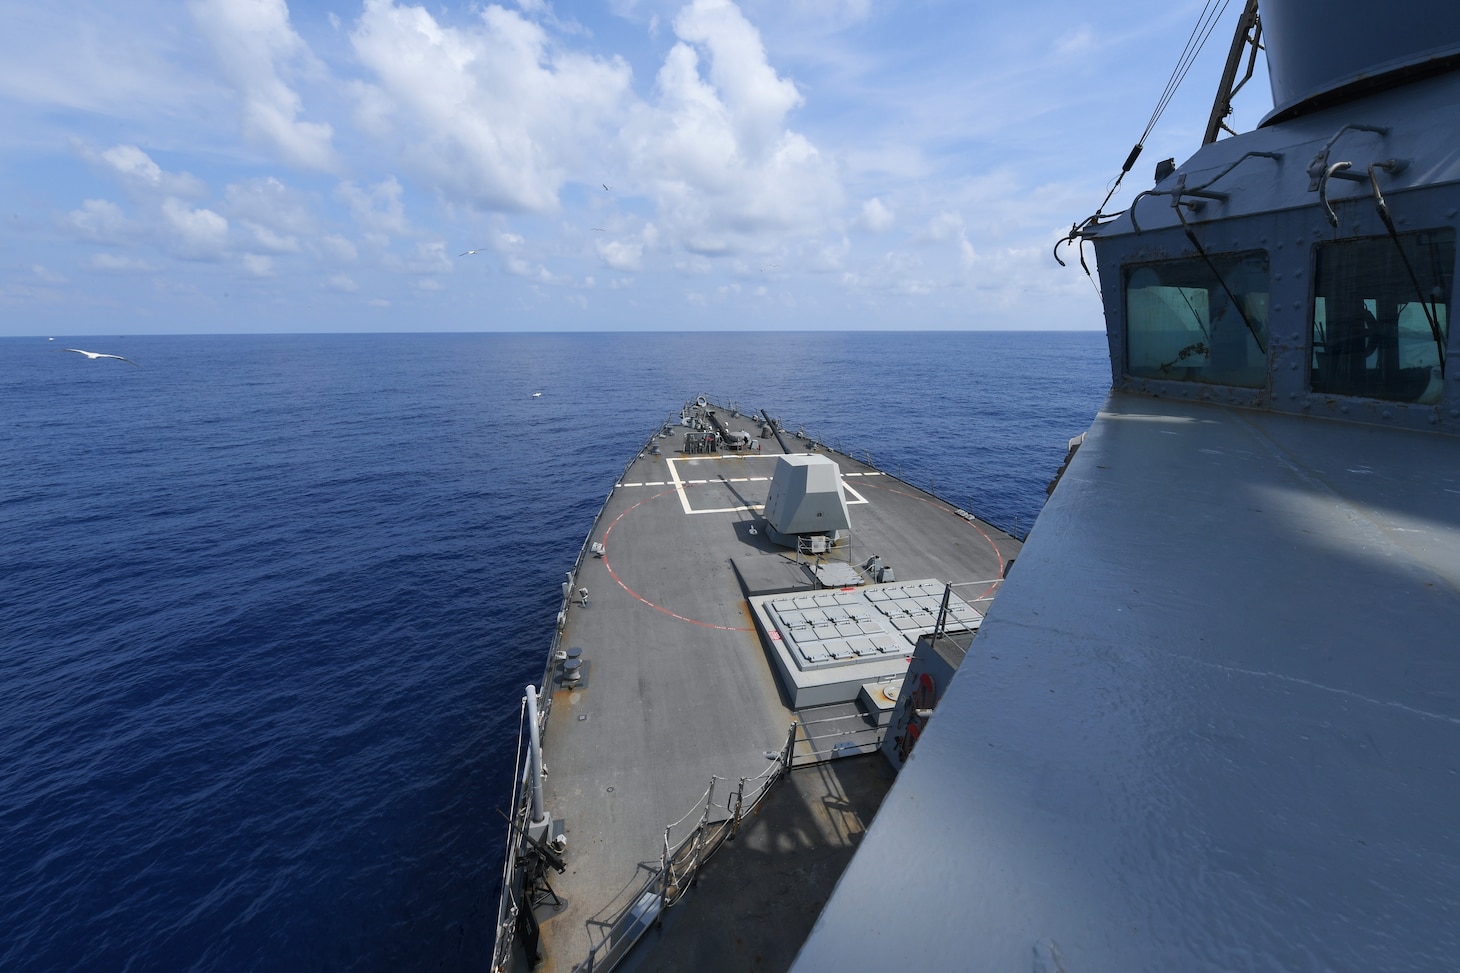 SOUTH CHINA SEA (May 10, 2024) The Arleigh Burke-class guided-missile destroyer USS Halsey (DDG 97) conducts routine underway operations in the South China Sea, May 10, 2024. Halsey is forward-deployed and assigned to Destroyer Squadron (DESRON) 15, the Navy’s largest DESRON and the U.S. 7th Fleet’s principal surface force. (U.S. Navy photo by Mass Communication Specialist 3rd class Ismael Martinez)